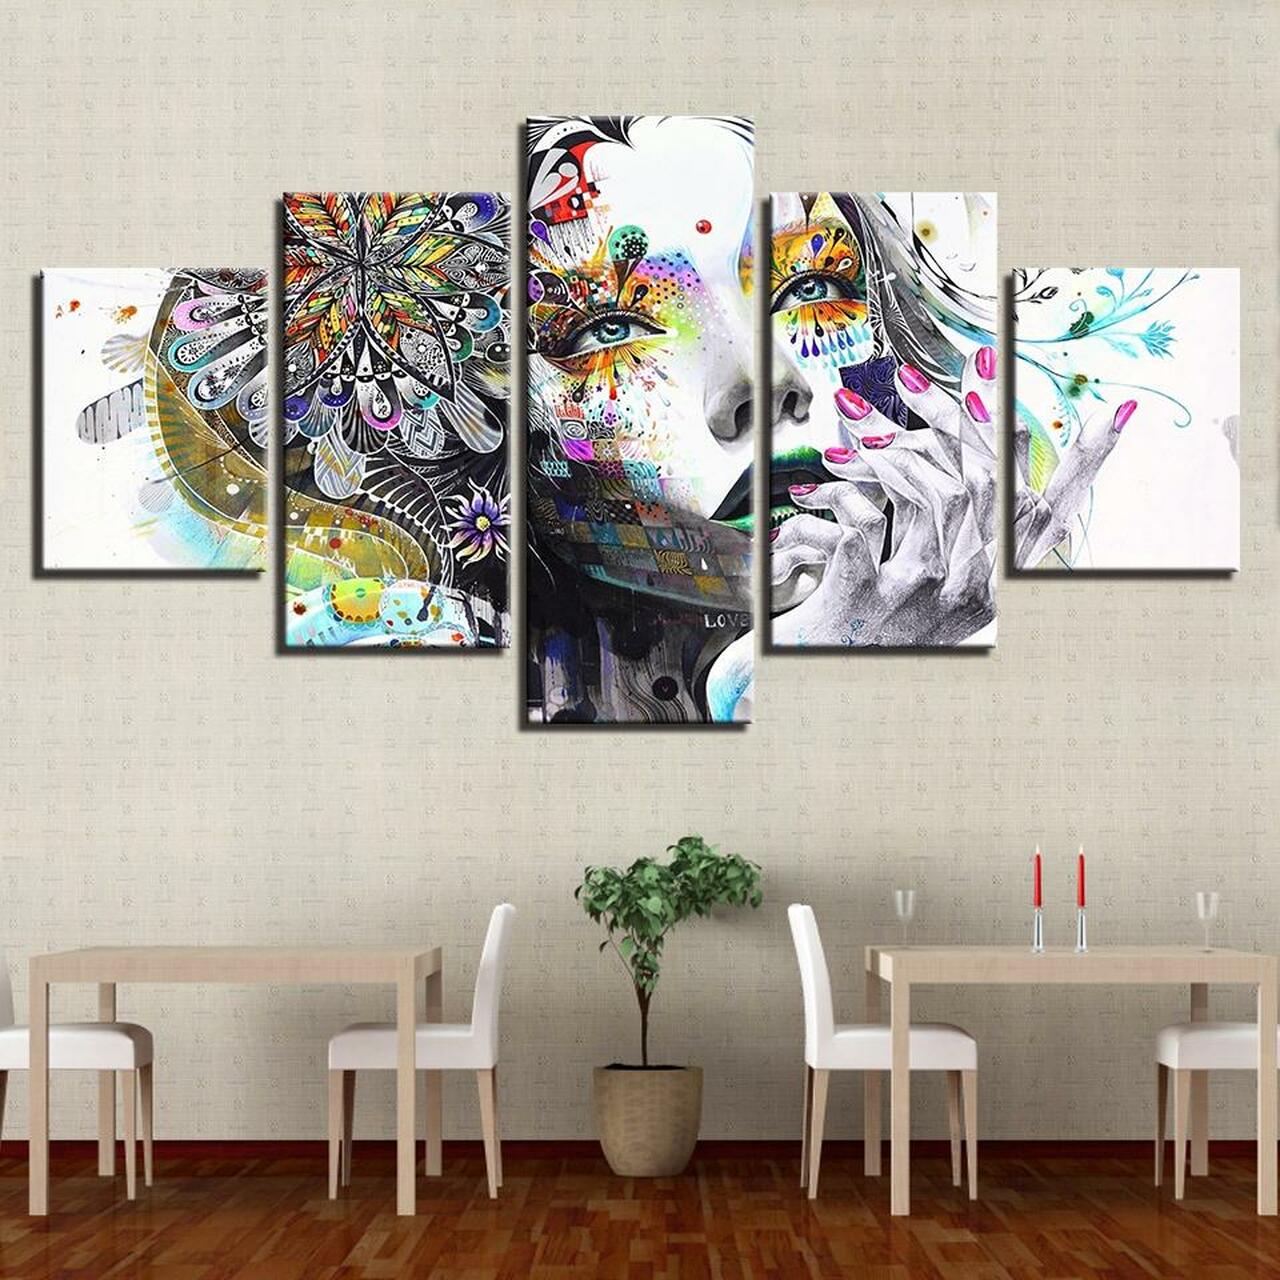 PSYCHEDELIC GIRL 5 Piece Canvas Art Wall Decor